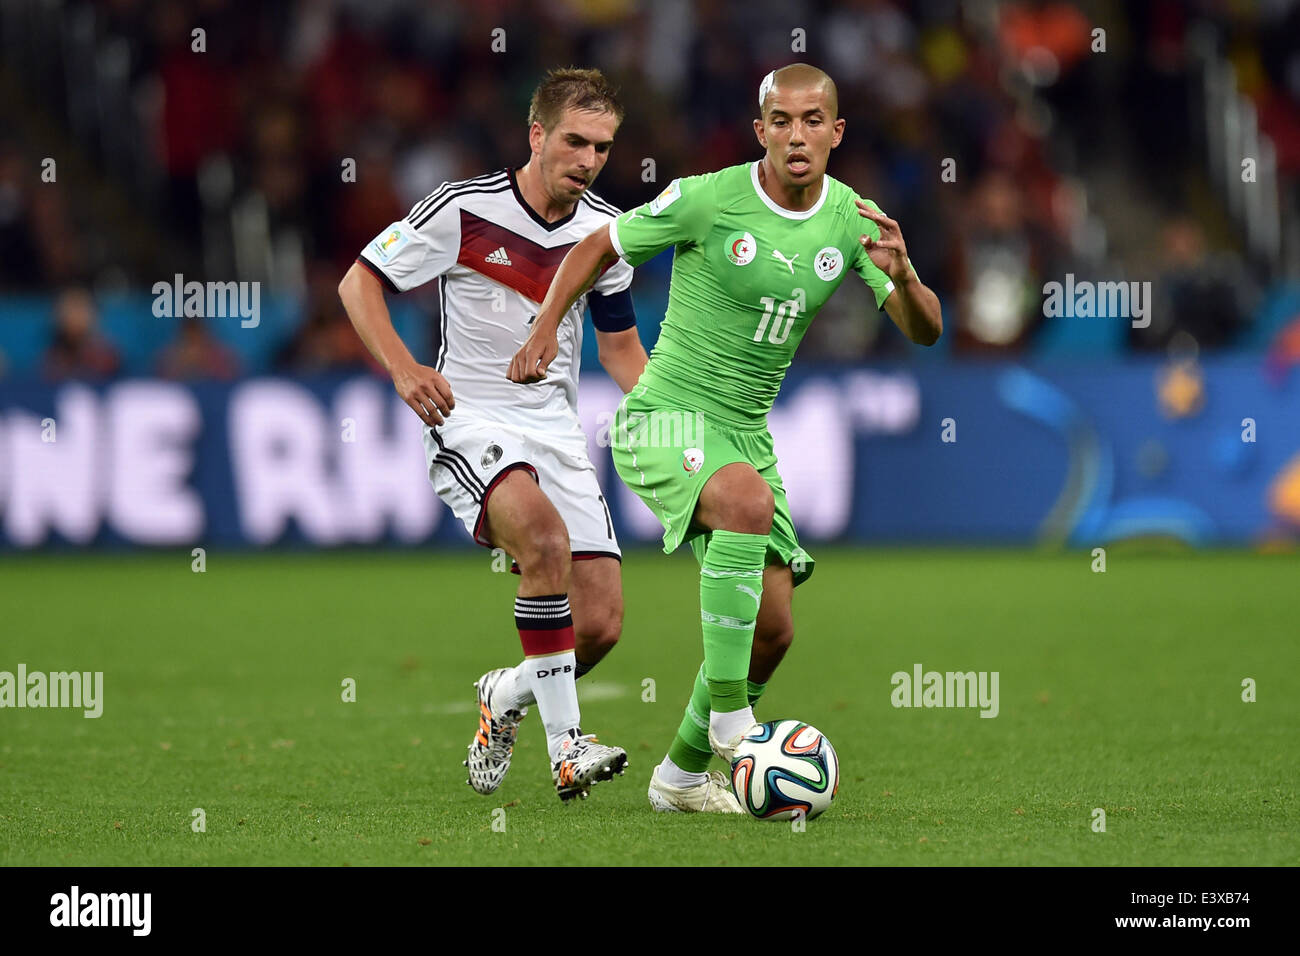 Porto Alegre, Brazil. 30th June, 2014. PORTO ALEGRE, 30.06.2014: BRAZIL: Philipp Lahm and Feghouli in match between Germany and Algeria, corresponding to the round of the last 16 of the World Cup 2014, played at the Beira Rio stadium in Porto Alegre, June 30, 2014 Photo:. Edu Andrade/Urbanandsport/Nurphoto. © Edu Andrade/NurPhoto/ZUMAPRESS.com/Alamy Live News Stock Photo